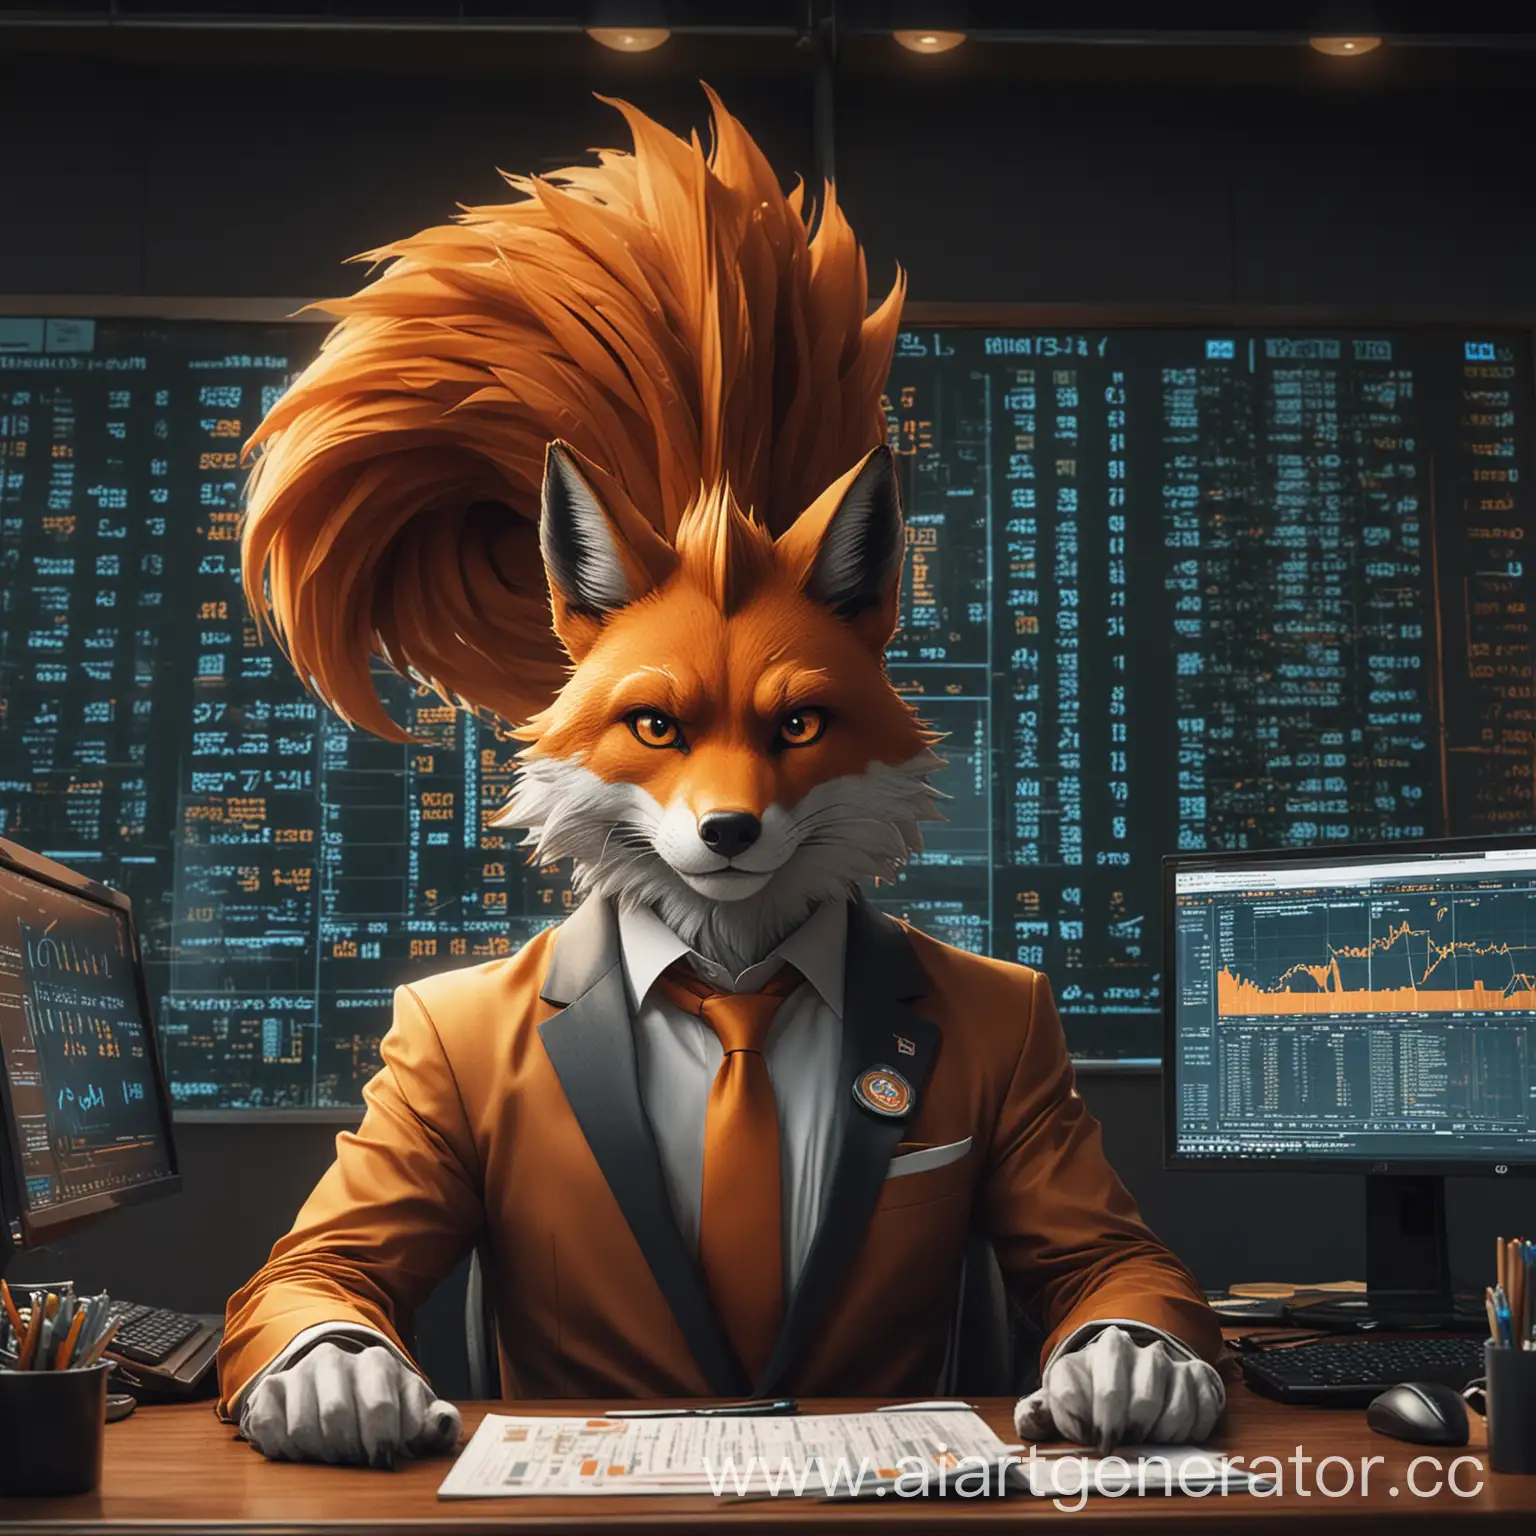 QURAMA-NineTailed-Fox-Stock-Exchange-Trader-in-Stylish-Office-Suit